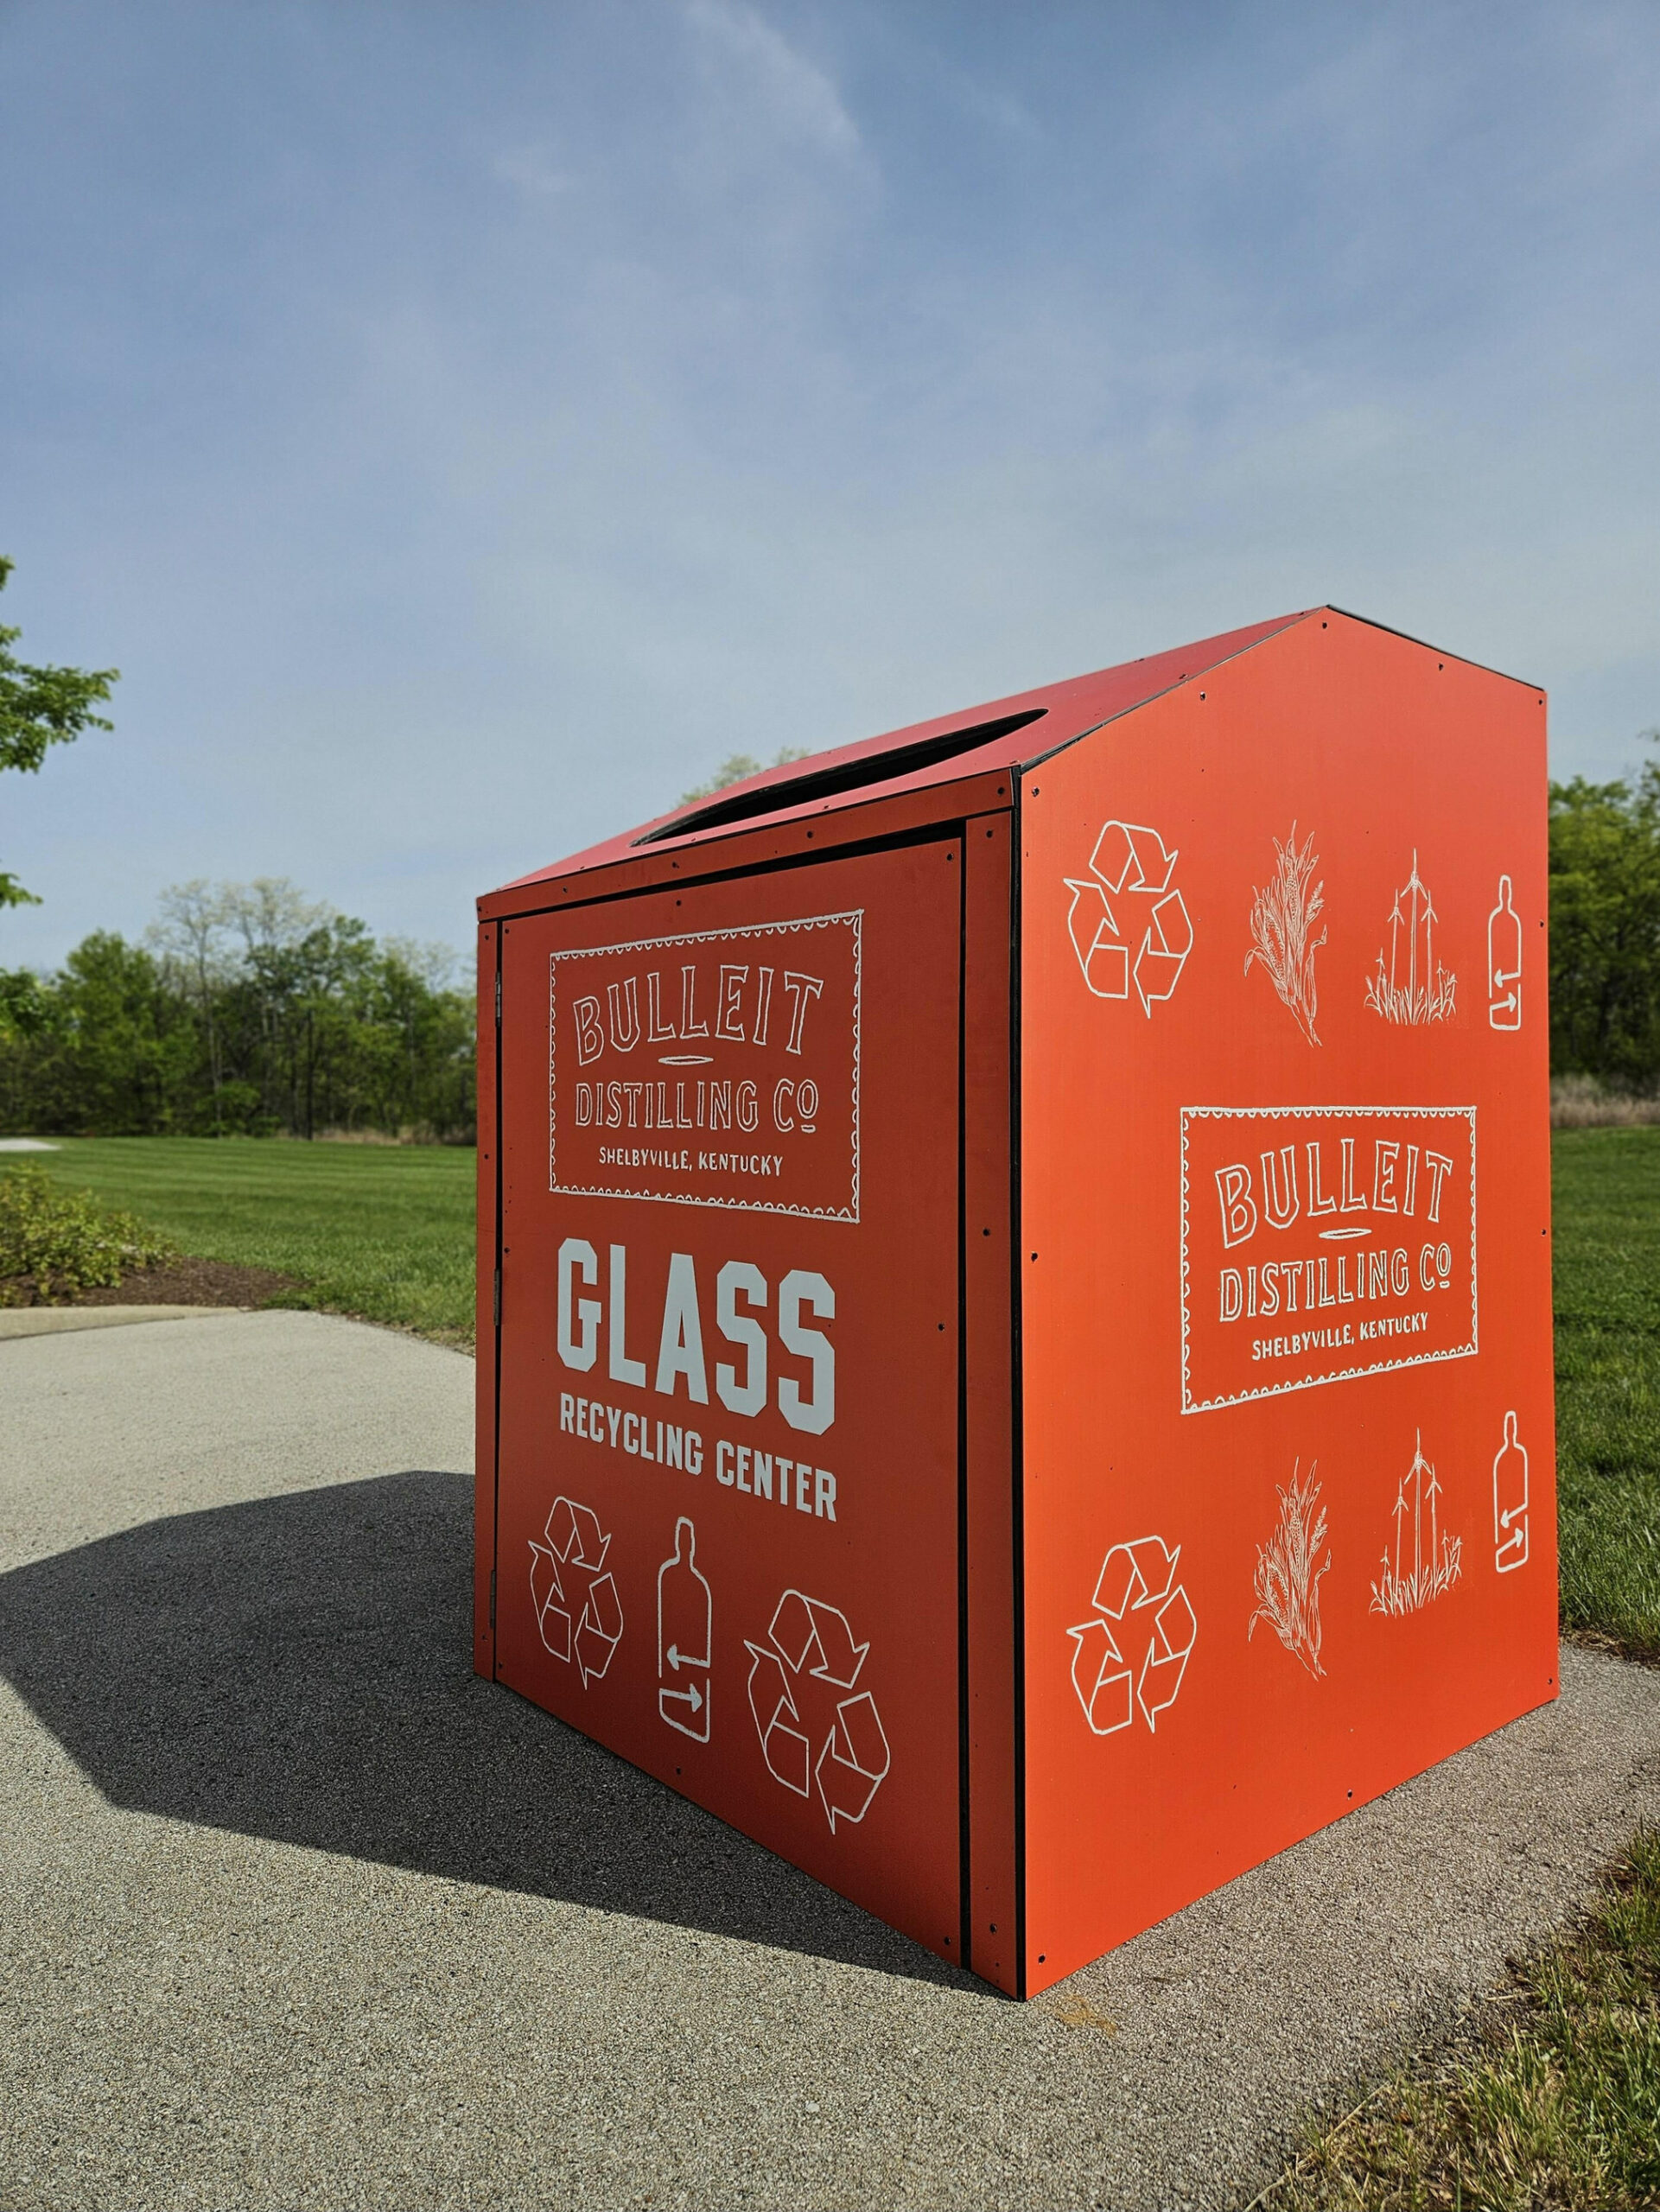 Bulleit Distilling Co. Opens its New Glass Recycling Drop-off Location